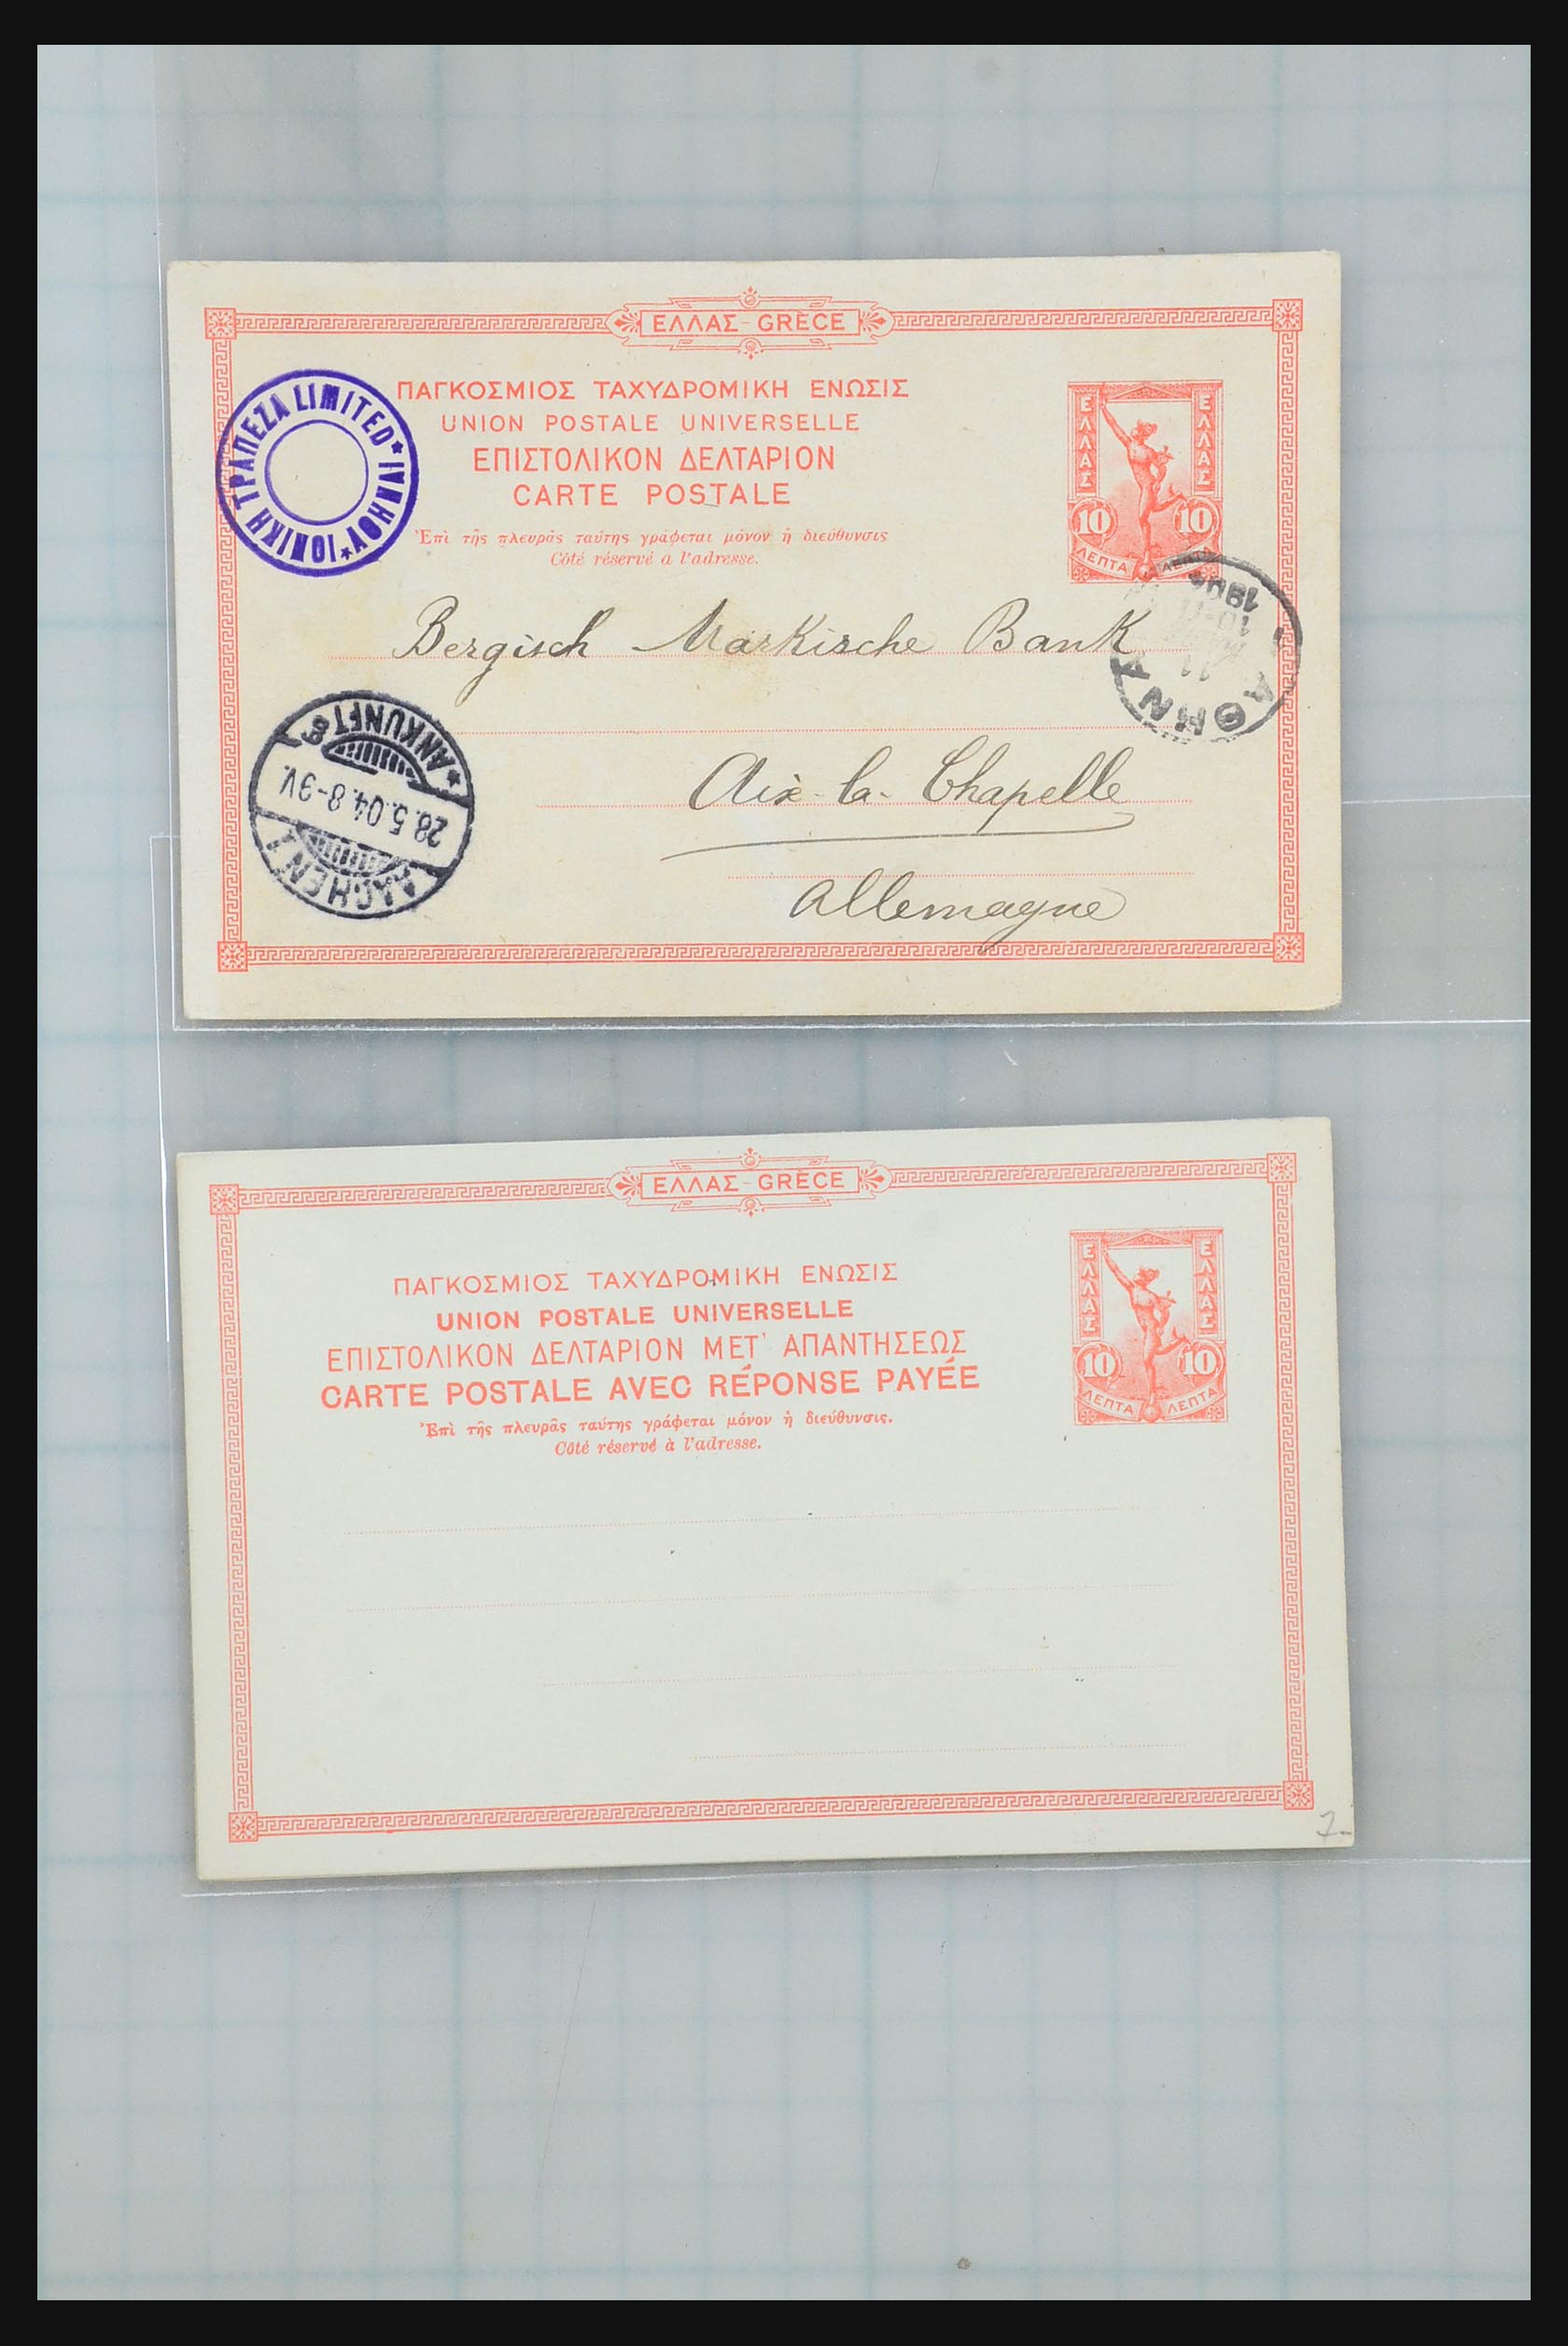 31358 027 - 31358 Portugal/Luxemburg/Greece covers 1880-1960.